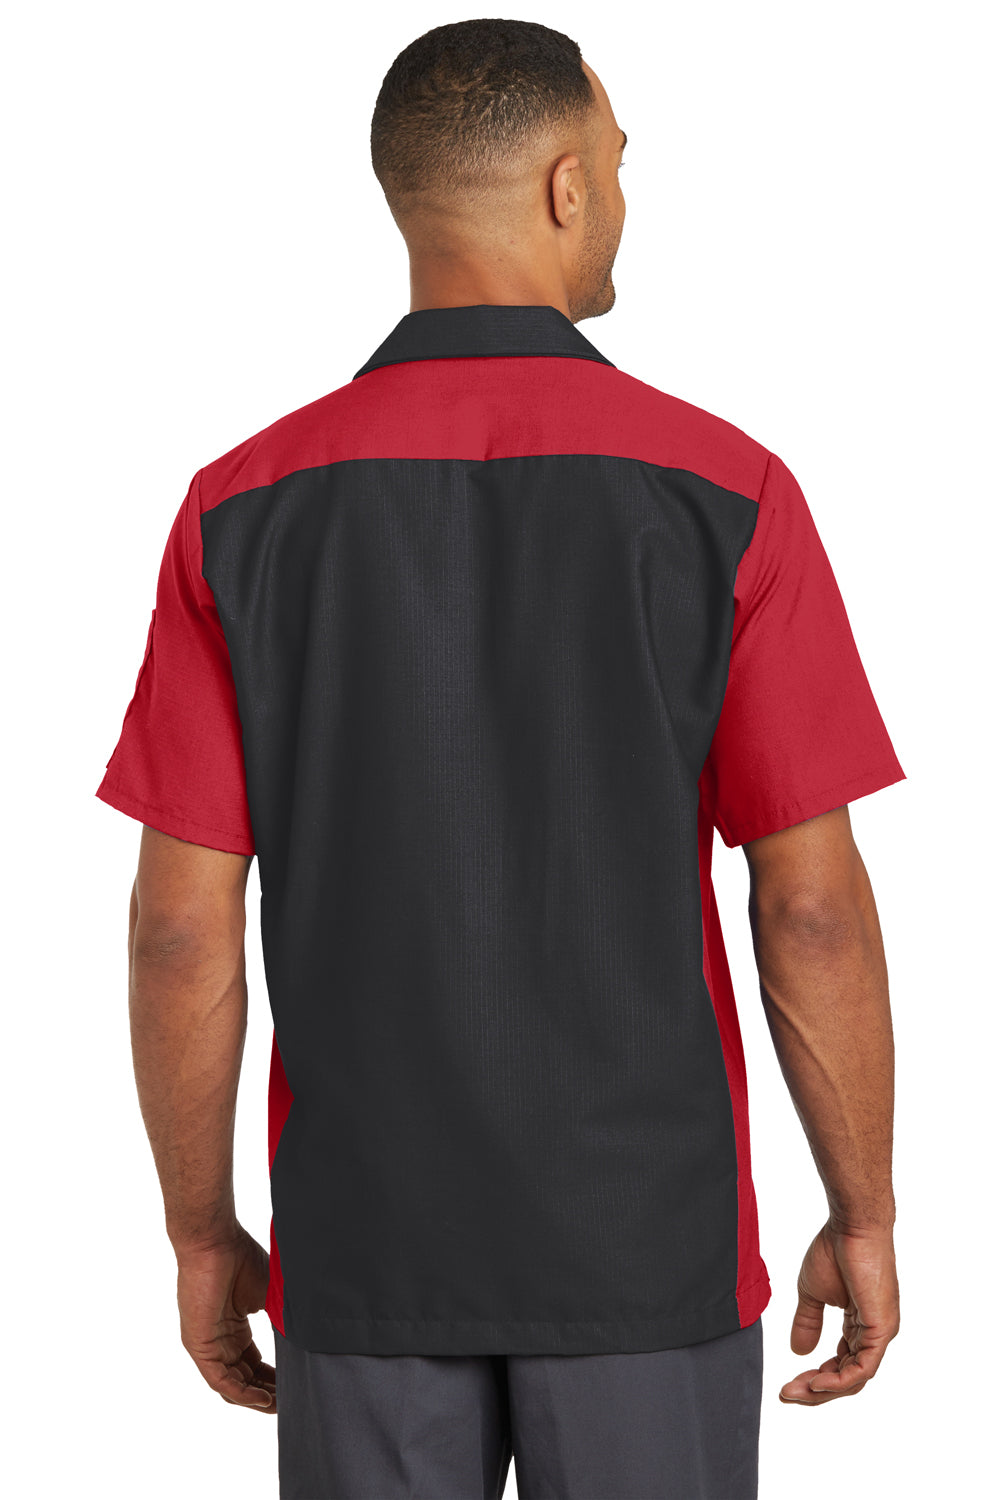 Red Kap SY20 Mens Crew Moisture Wicking Short Sleeve Button Down Shirt w/ Double Pockets Black/Red Back